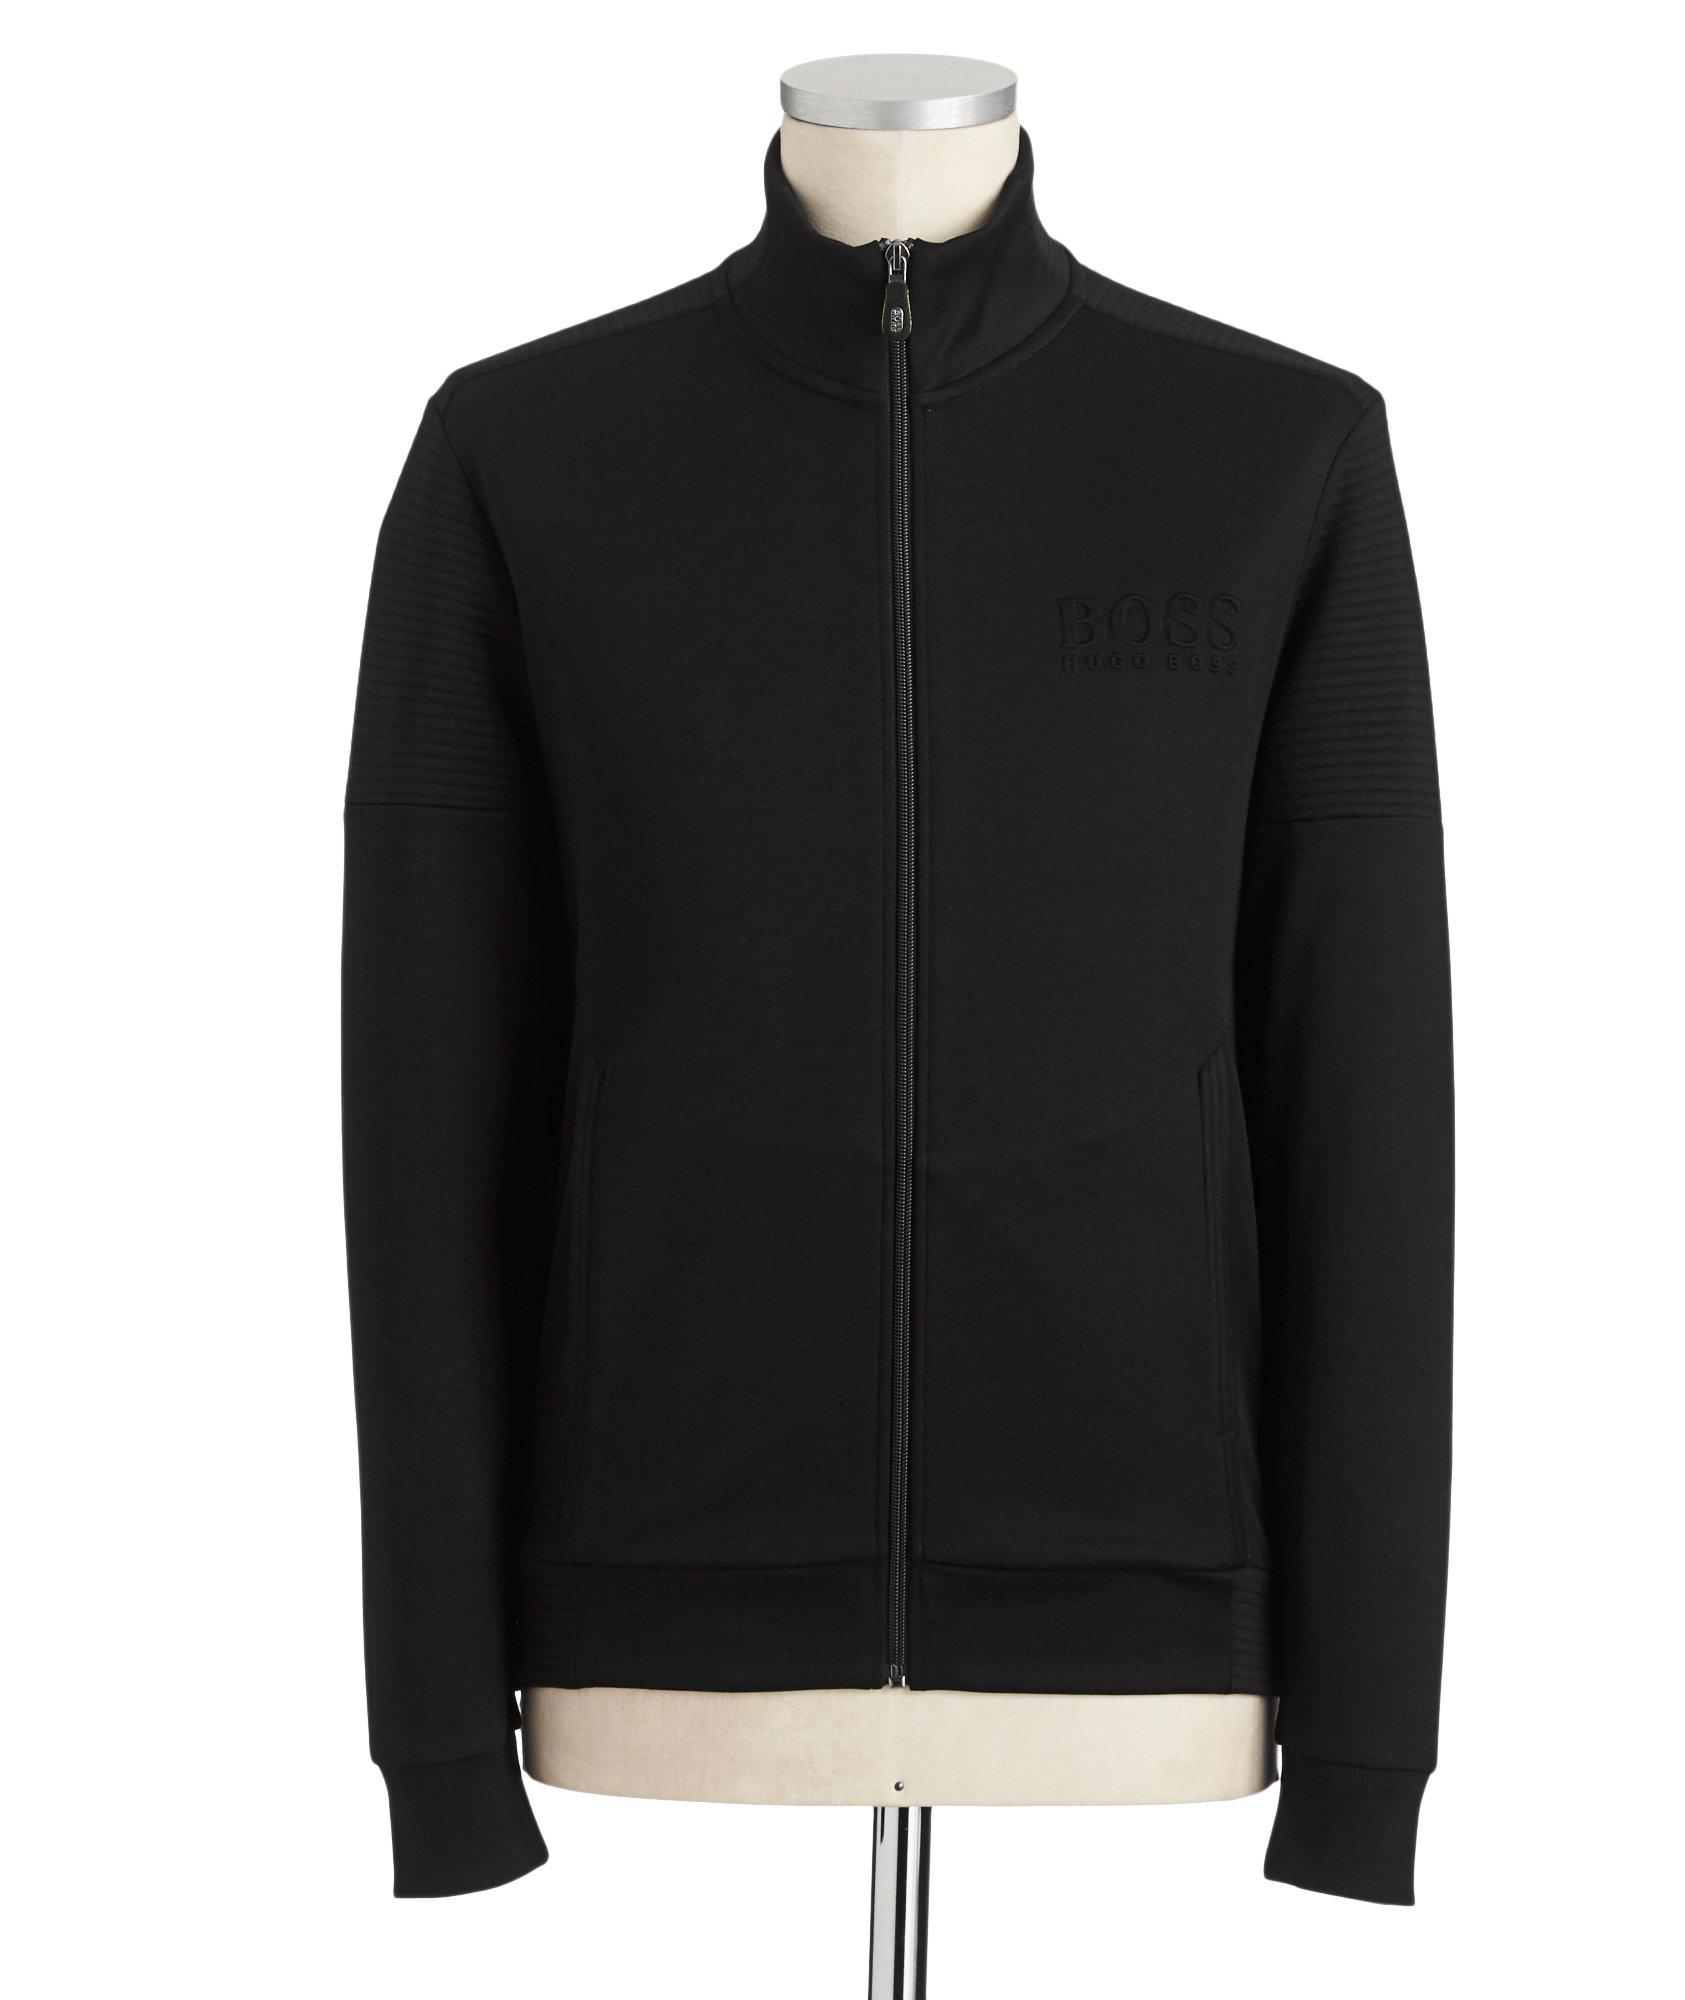 Cotton Blend Zip-Up Sweater image 0